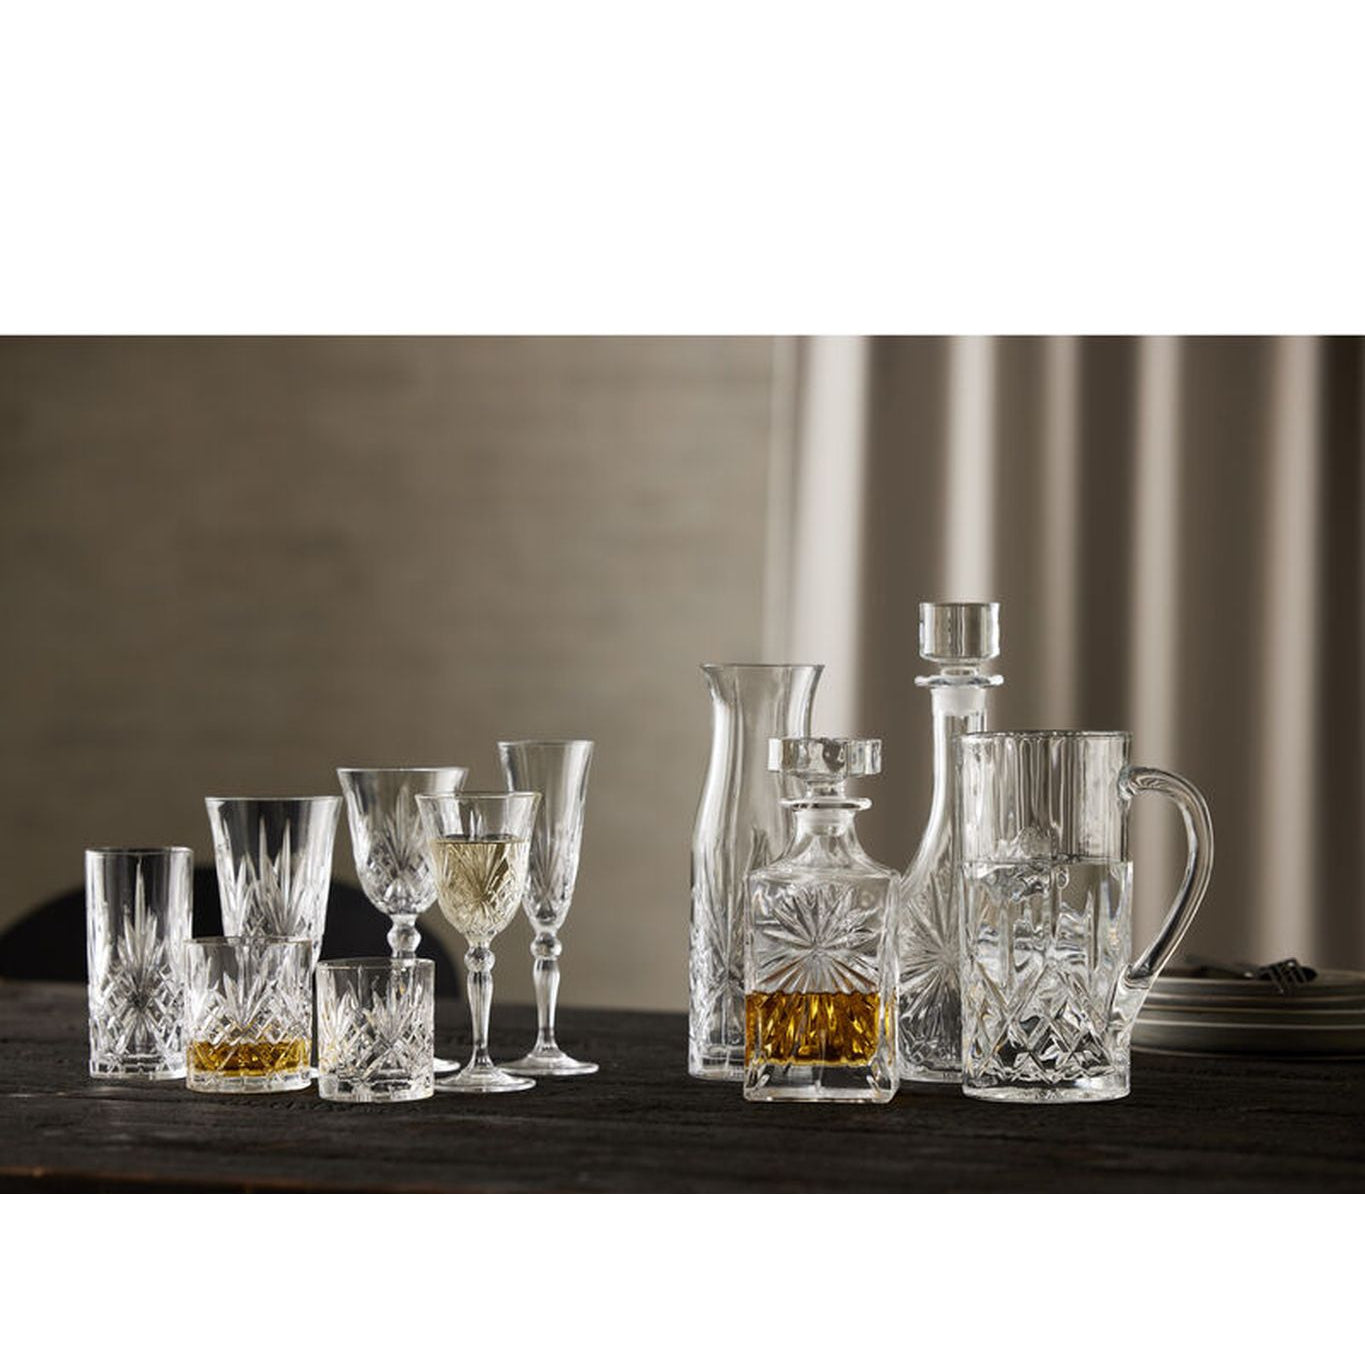 Lyngby Glas Melodia Water Glass 23 CL, 6 pc's.